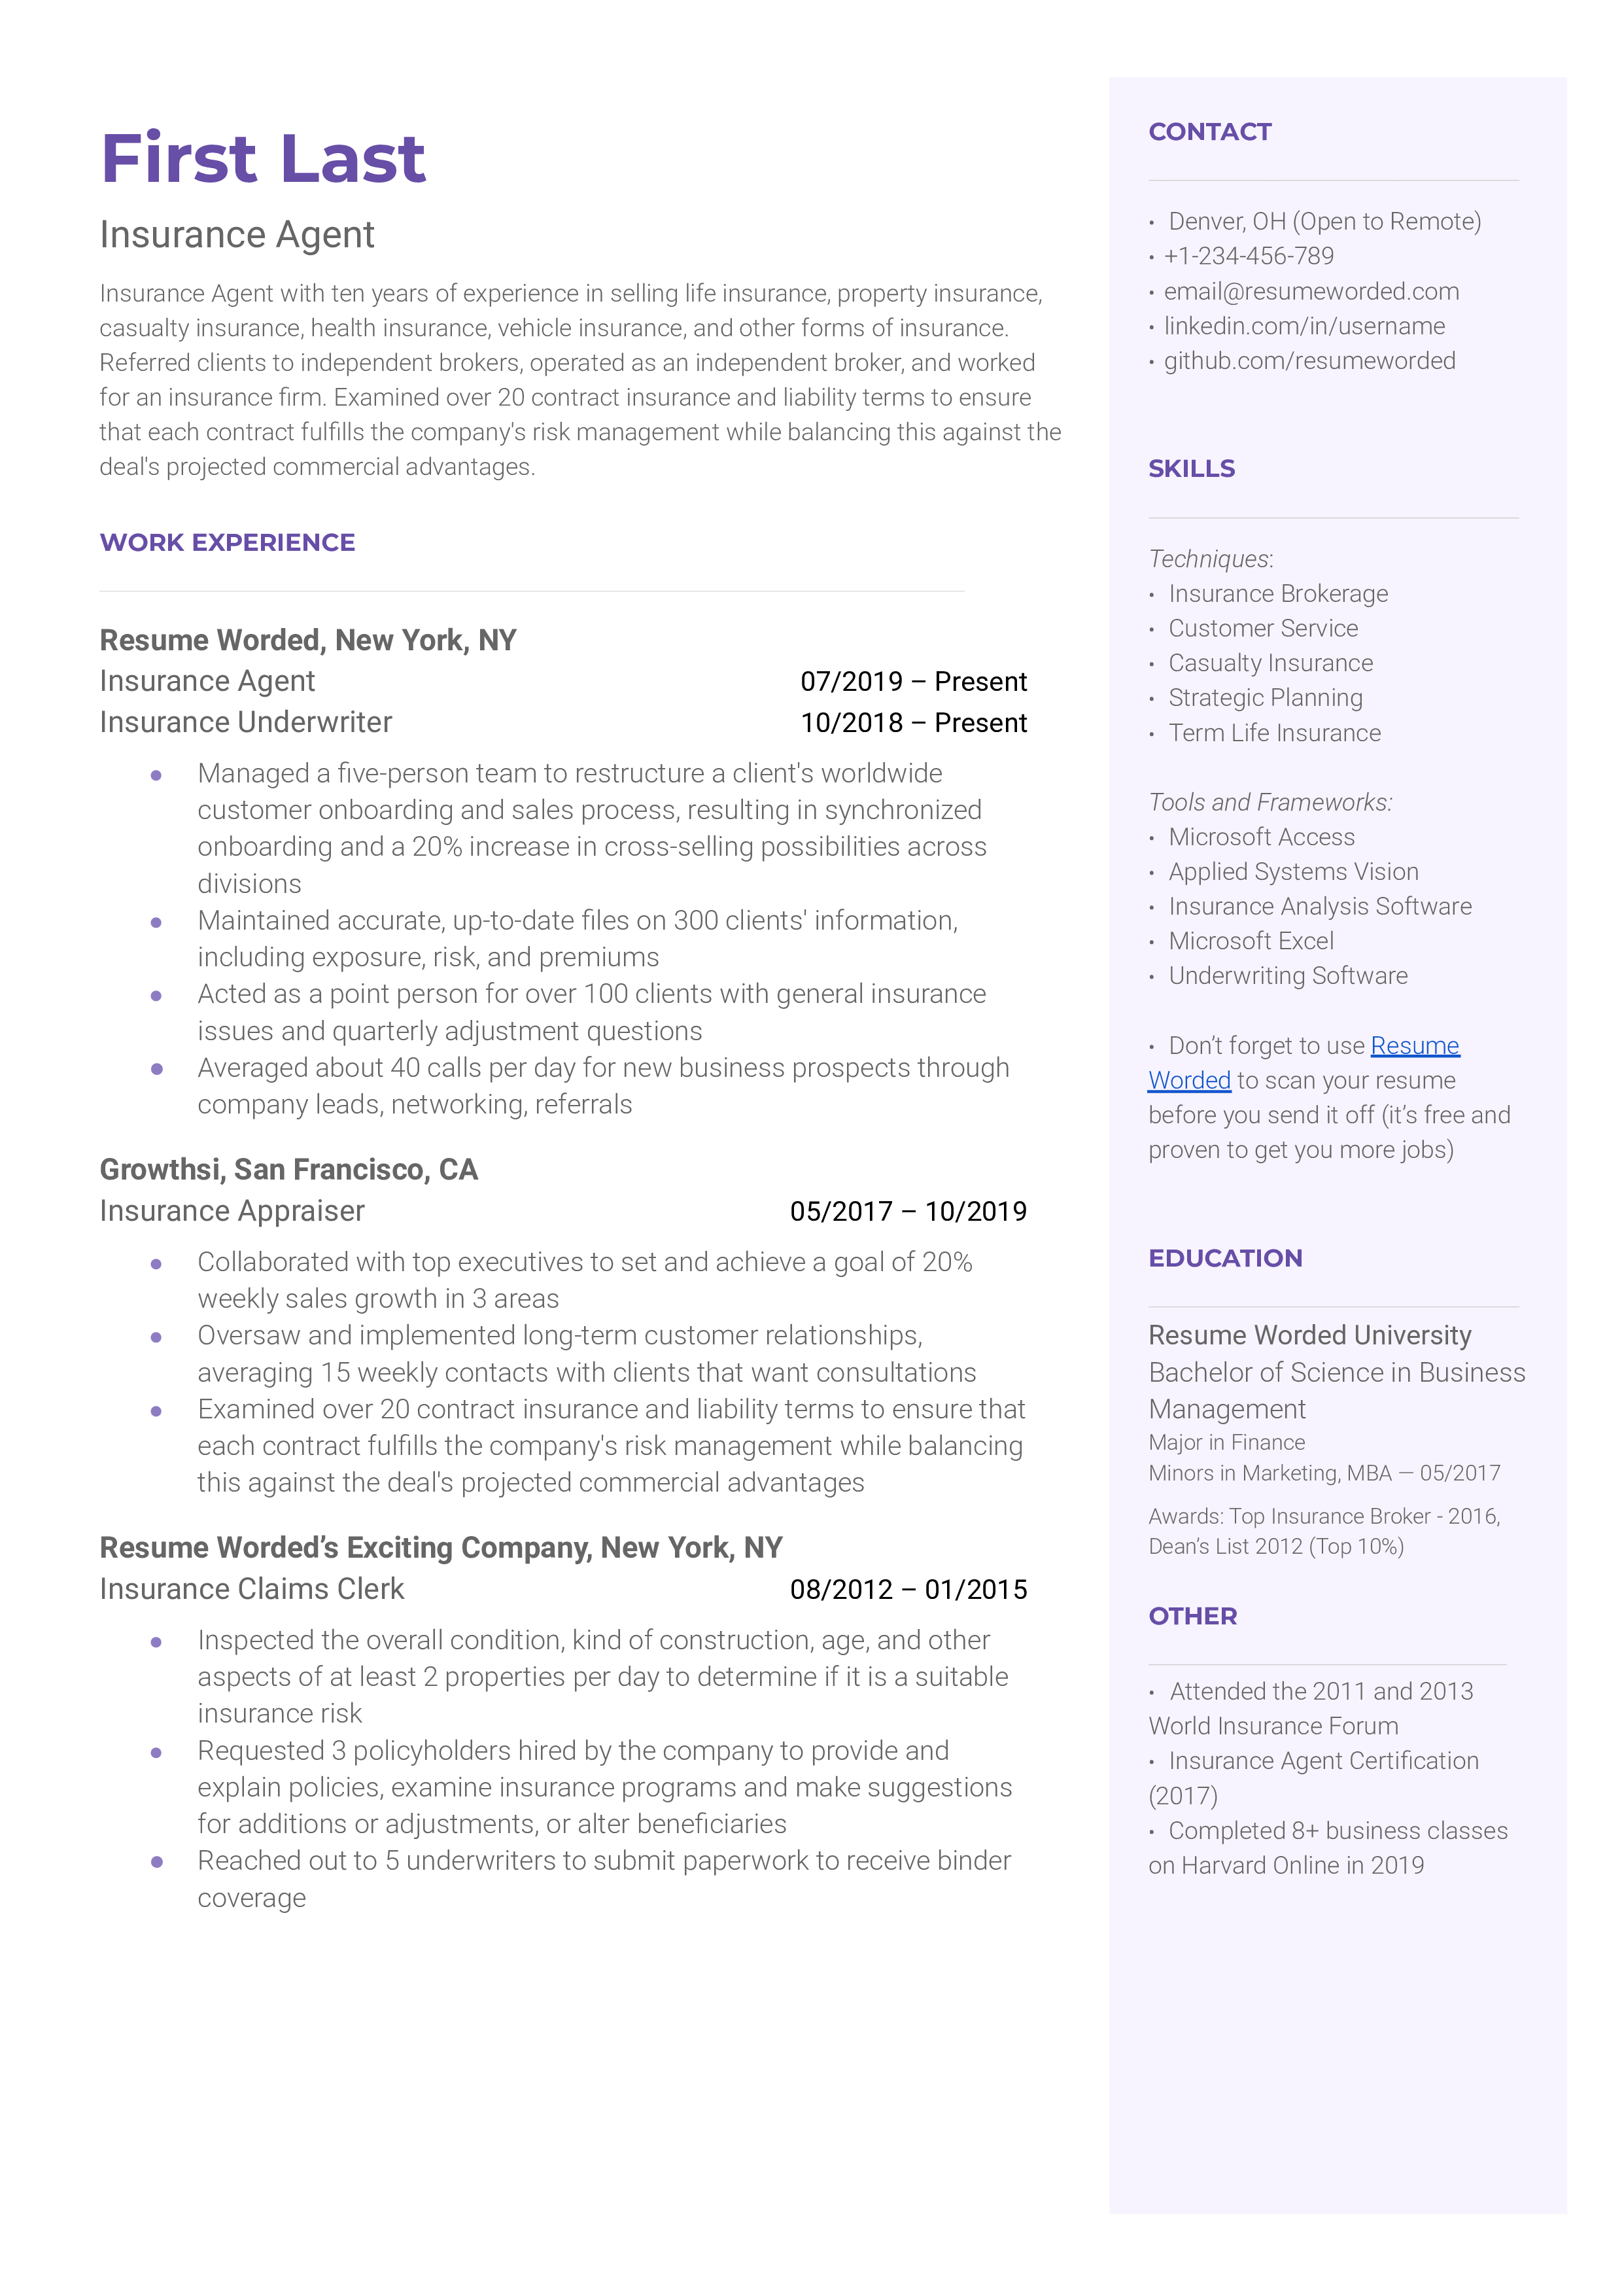 Insurance agent resume sample that highlights the applicant's sales success and educational background.